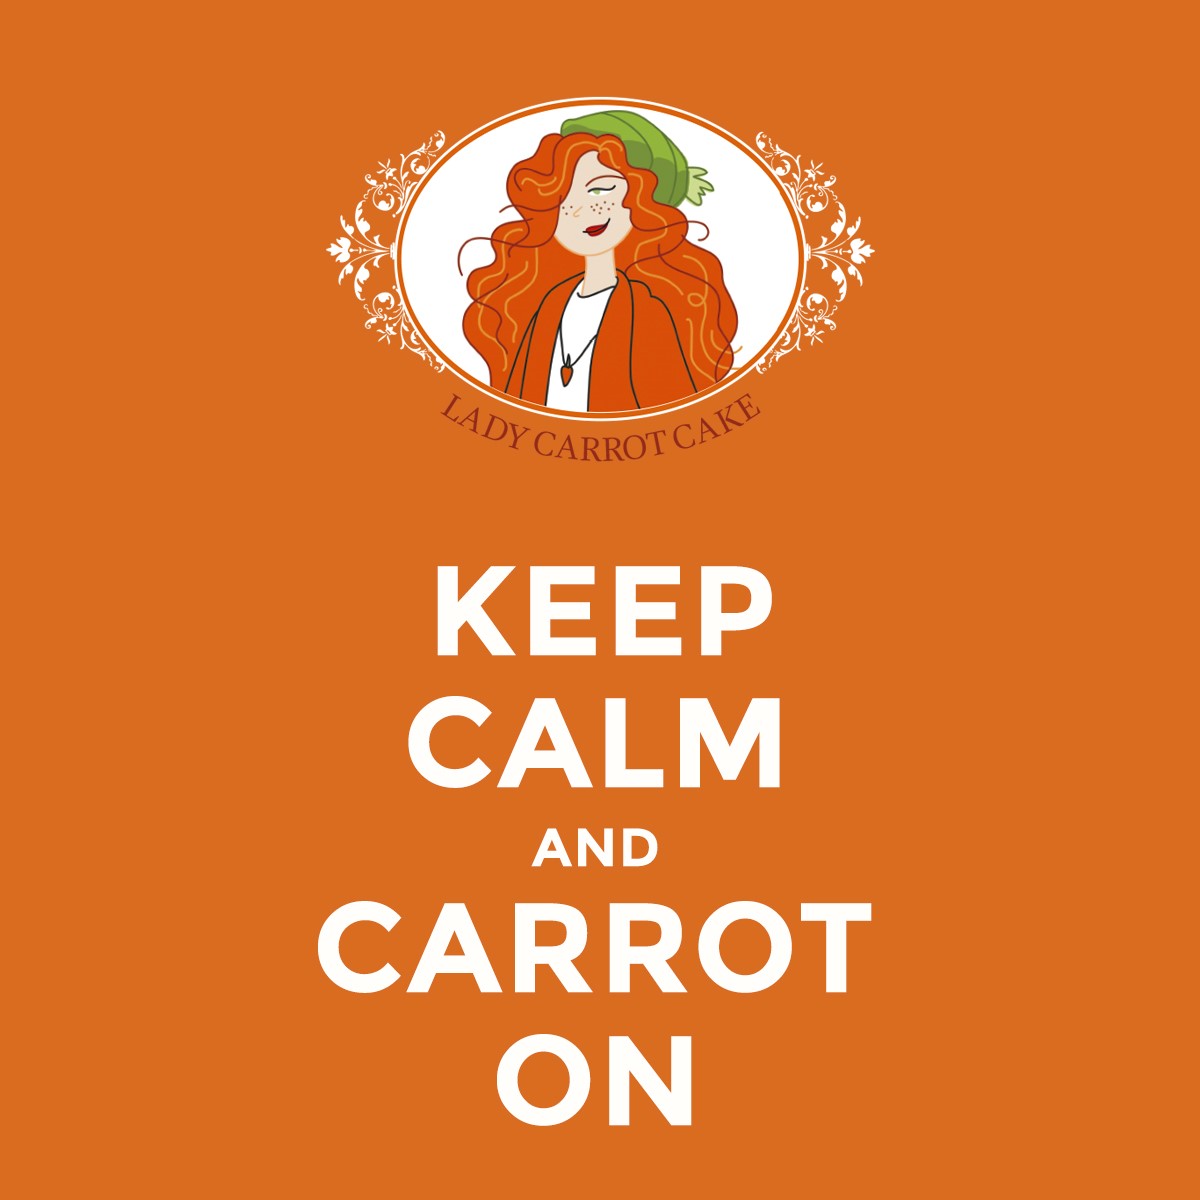 Lady Carrot Cake - Carrot and Olive Oil